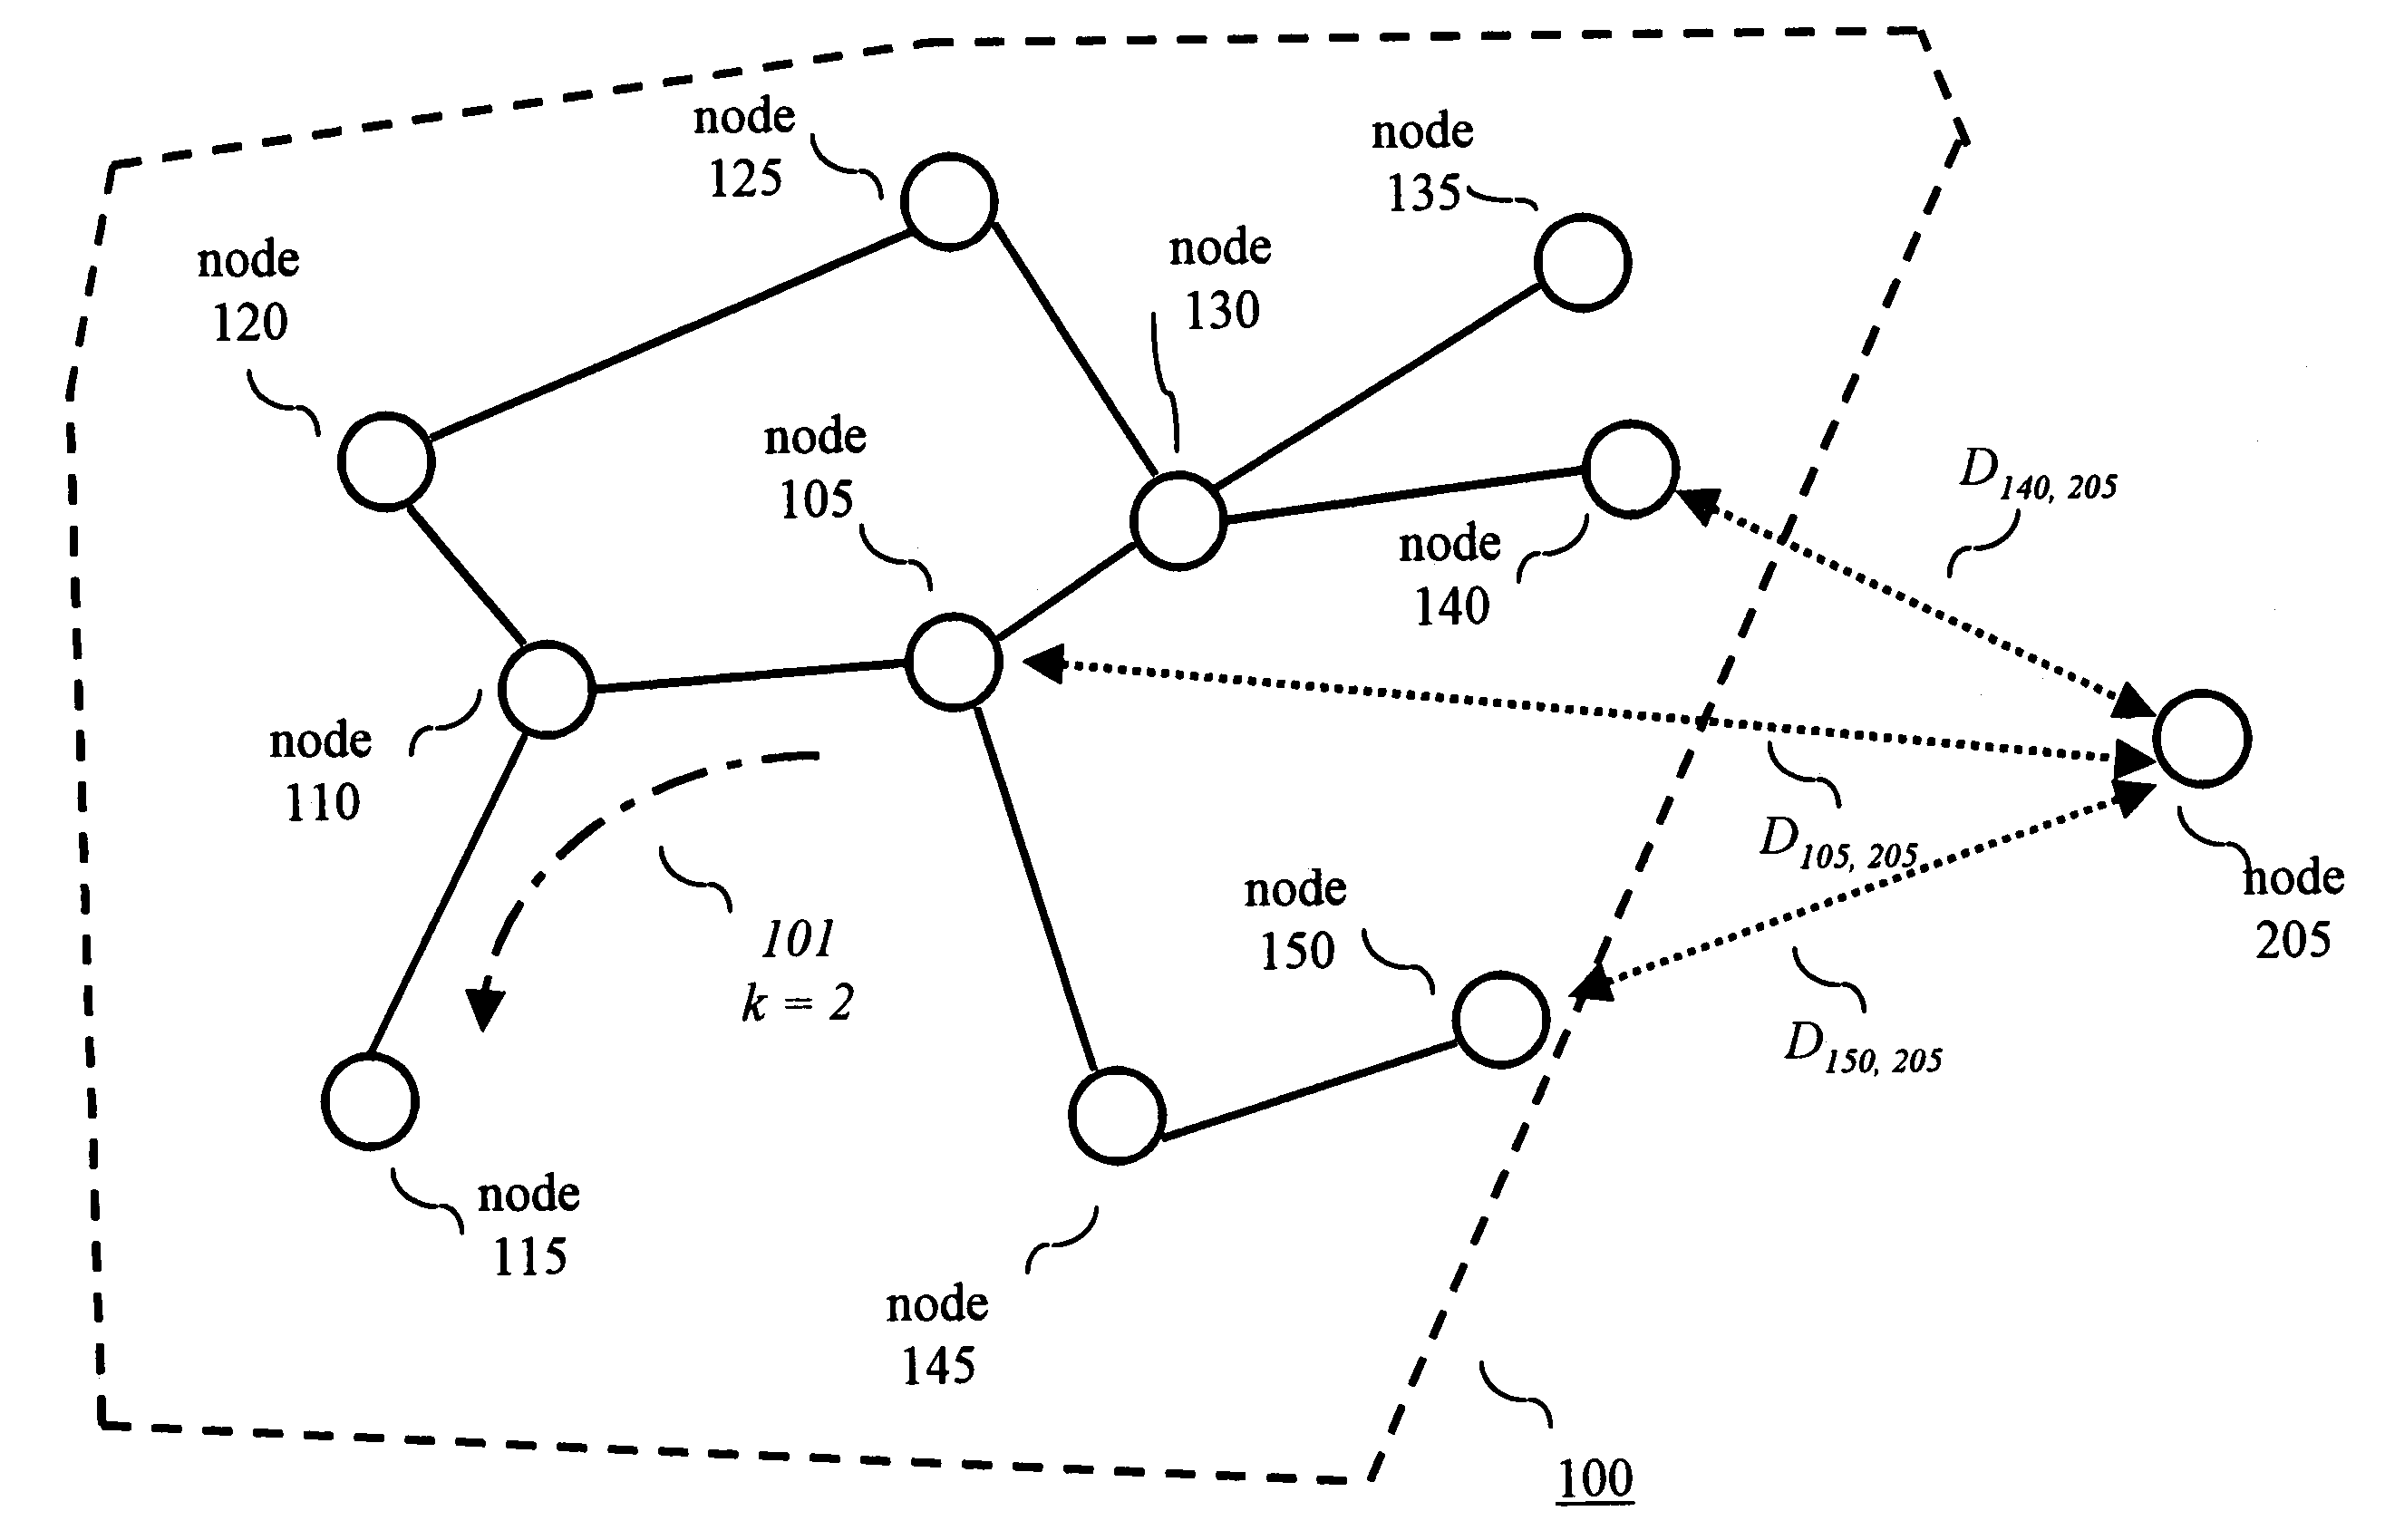 Location based routing for mobile ad-hoc networks